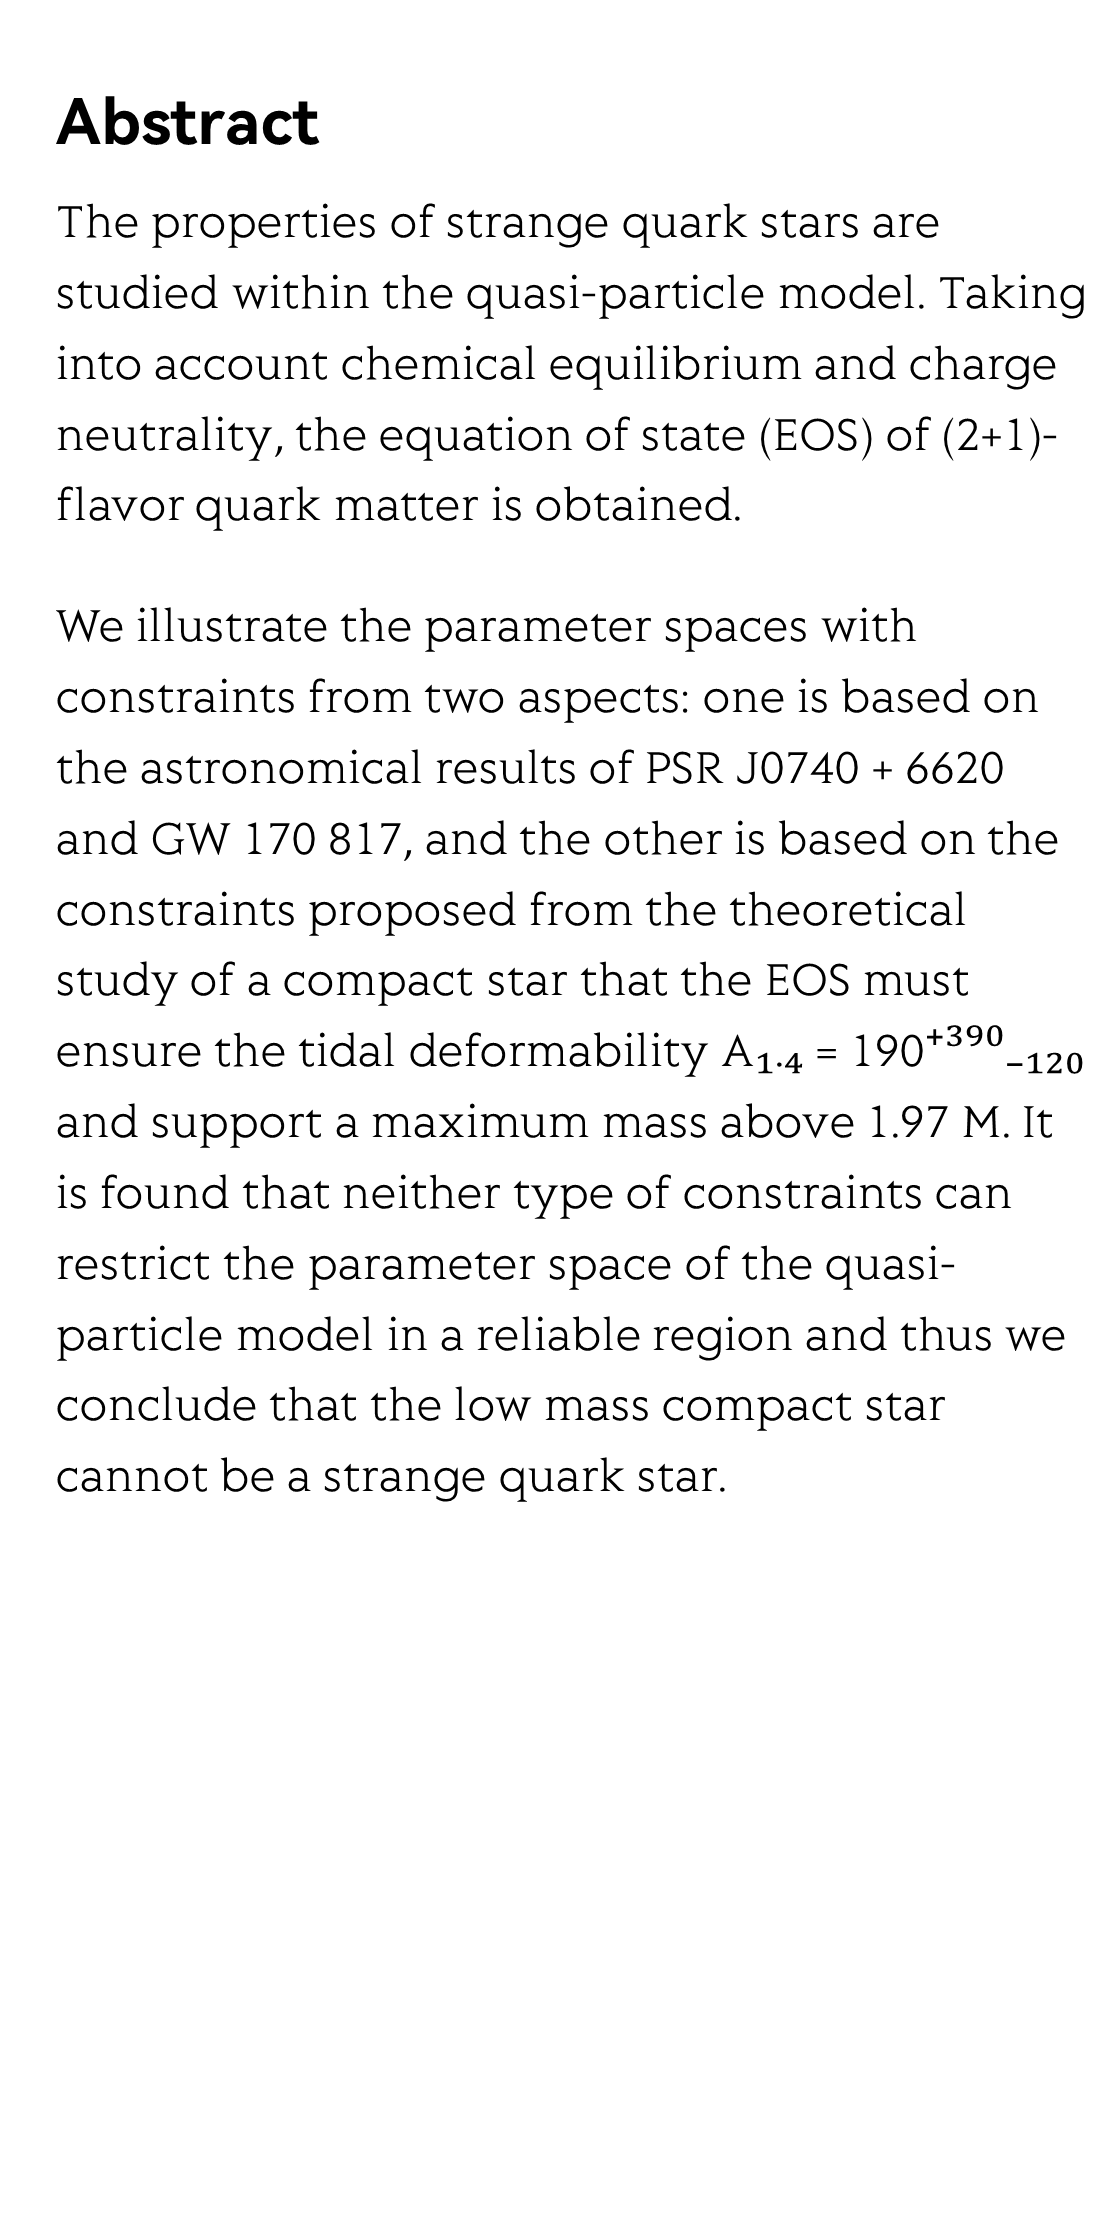 Strange quark star and the parameter space of the quasi-particle model_2